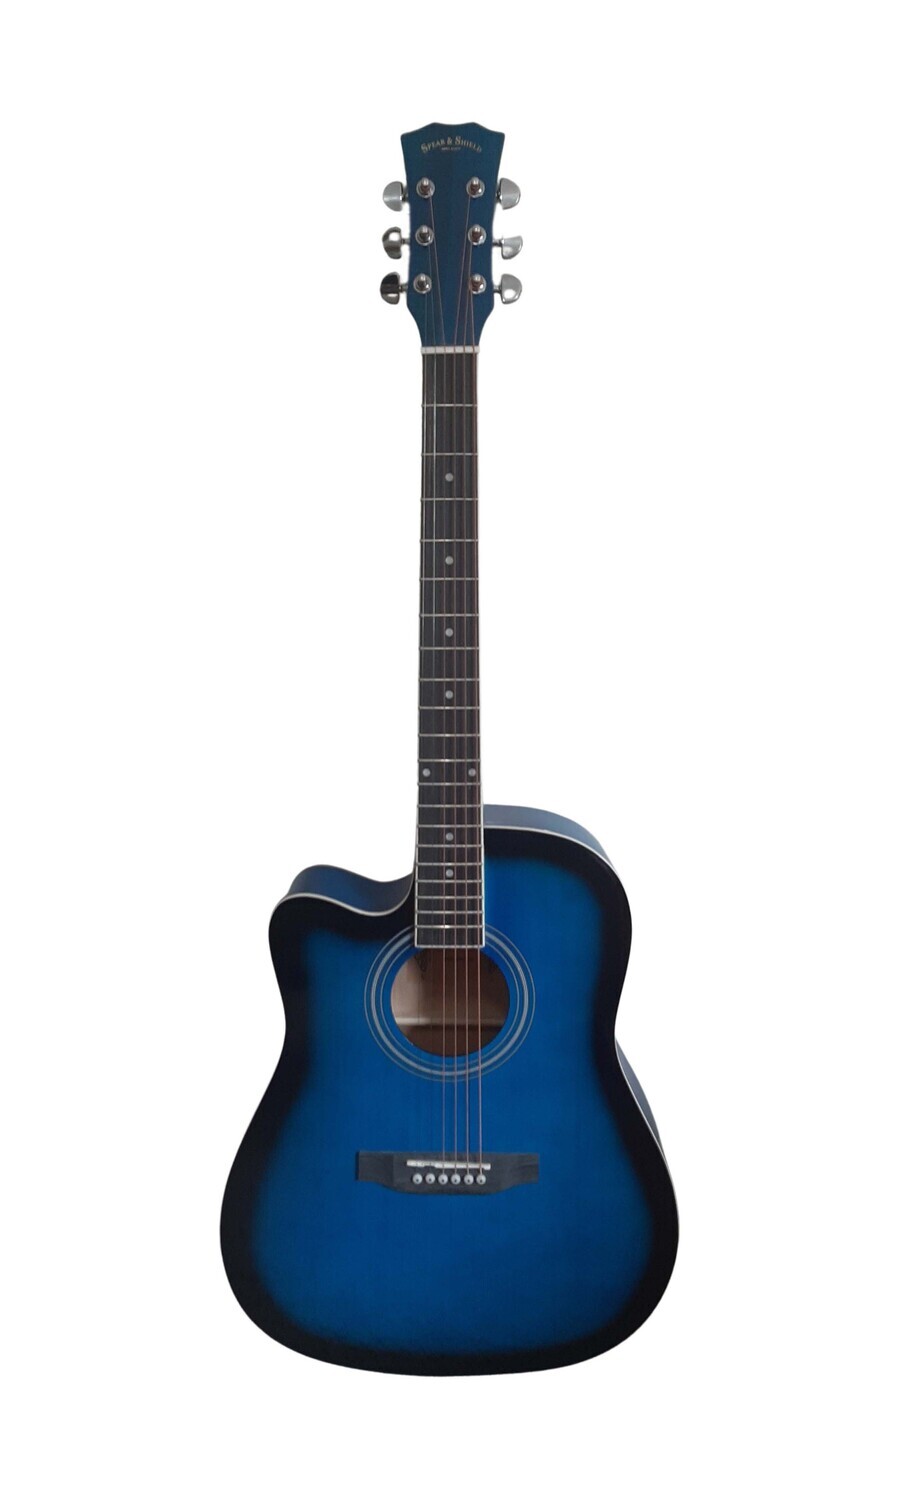 Spear & Shield Left handed Acoustic Guitar for Beginners Adults Students Intermediate players 41-inch full-size Dreadnought body cutaway Blue SPS339LF Free Shipping